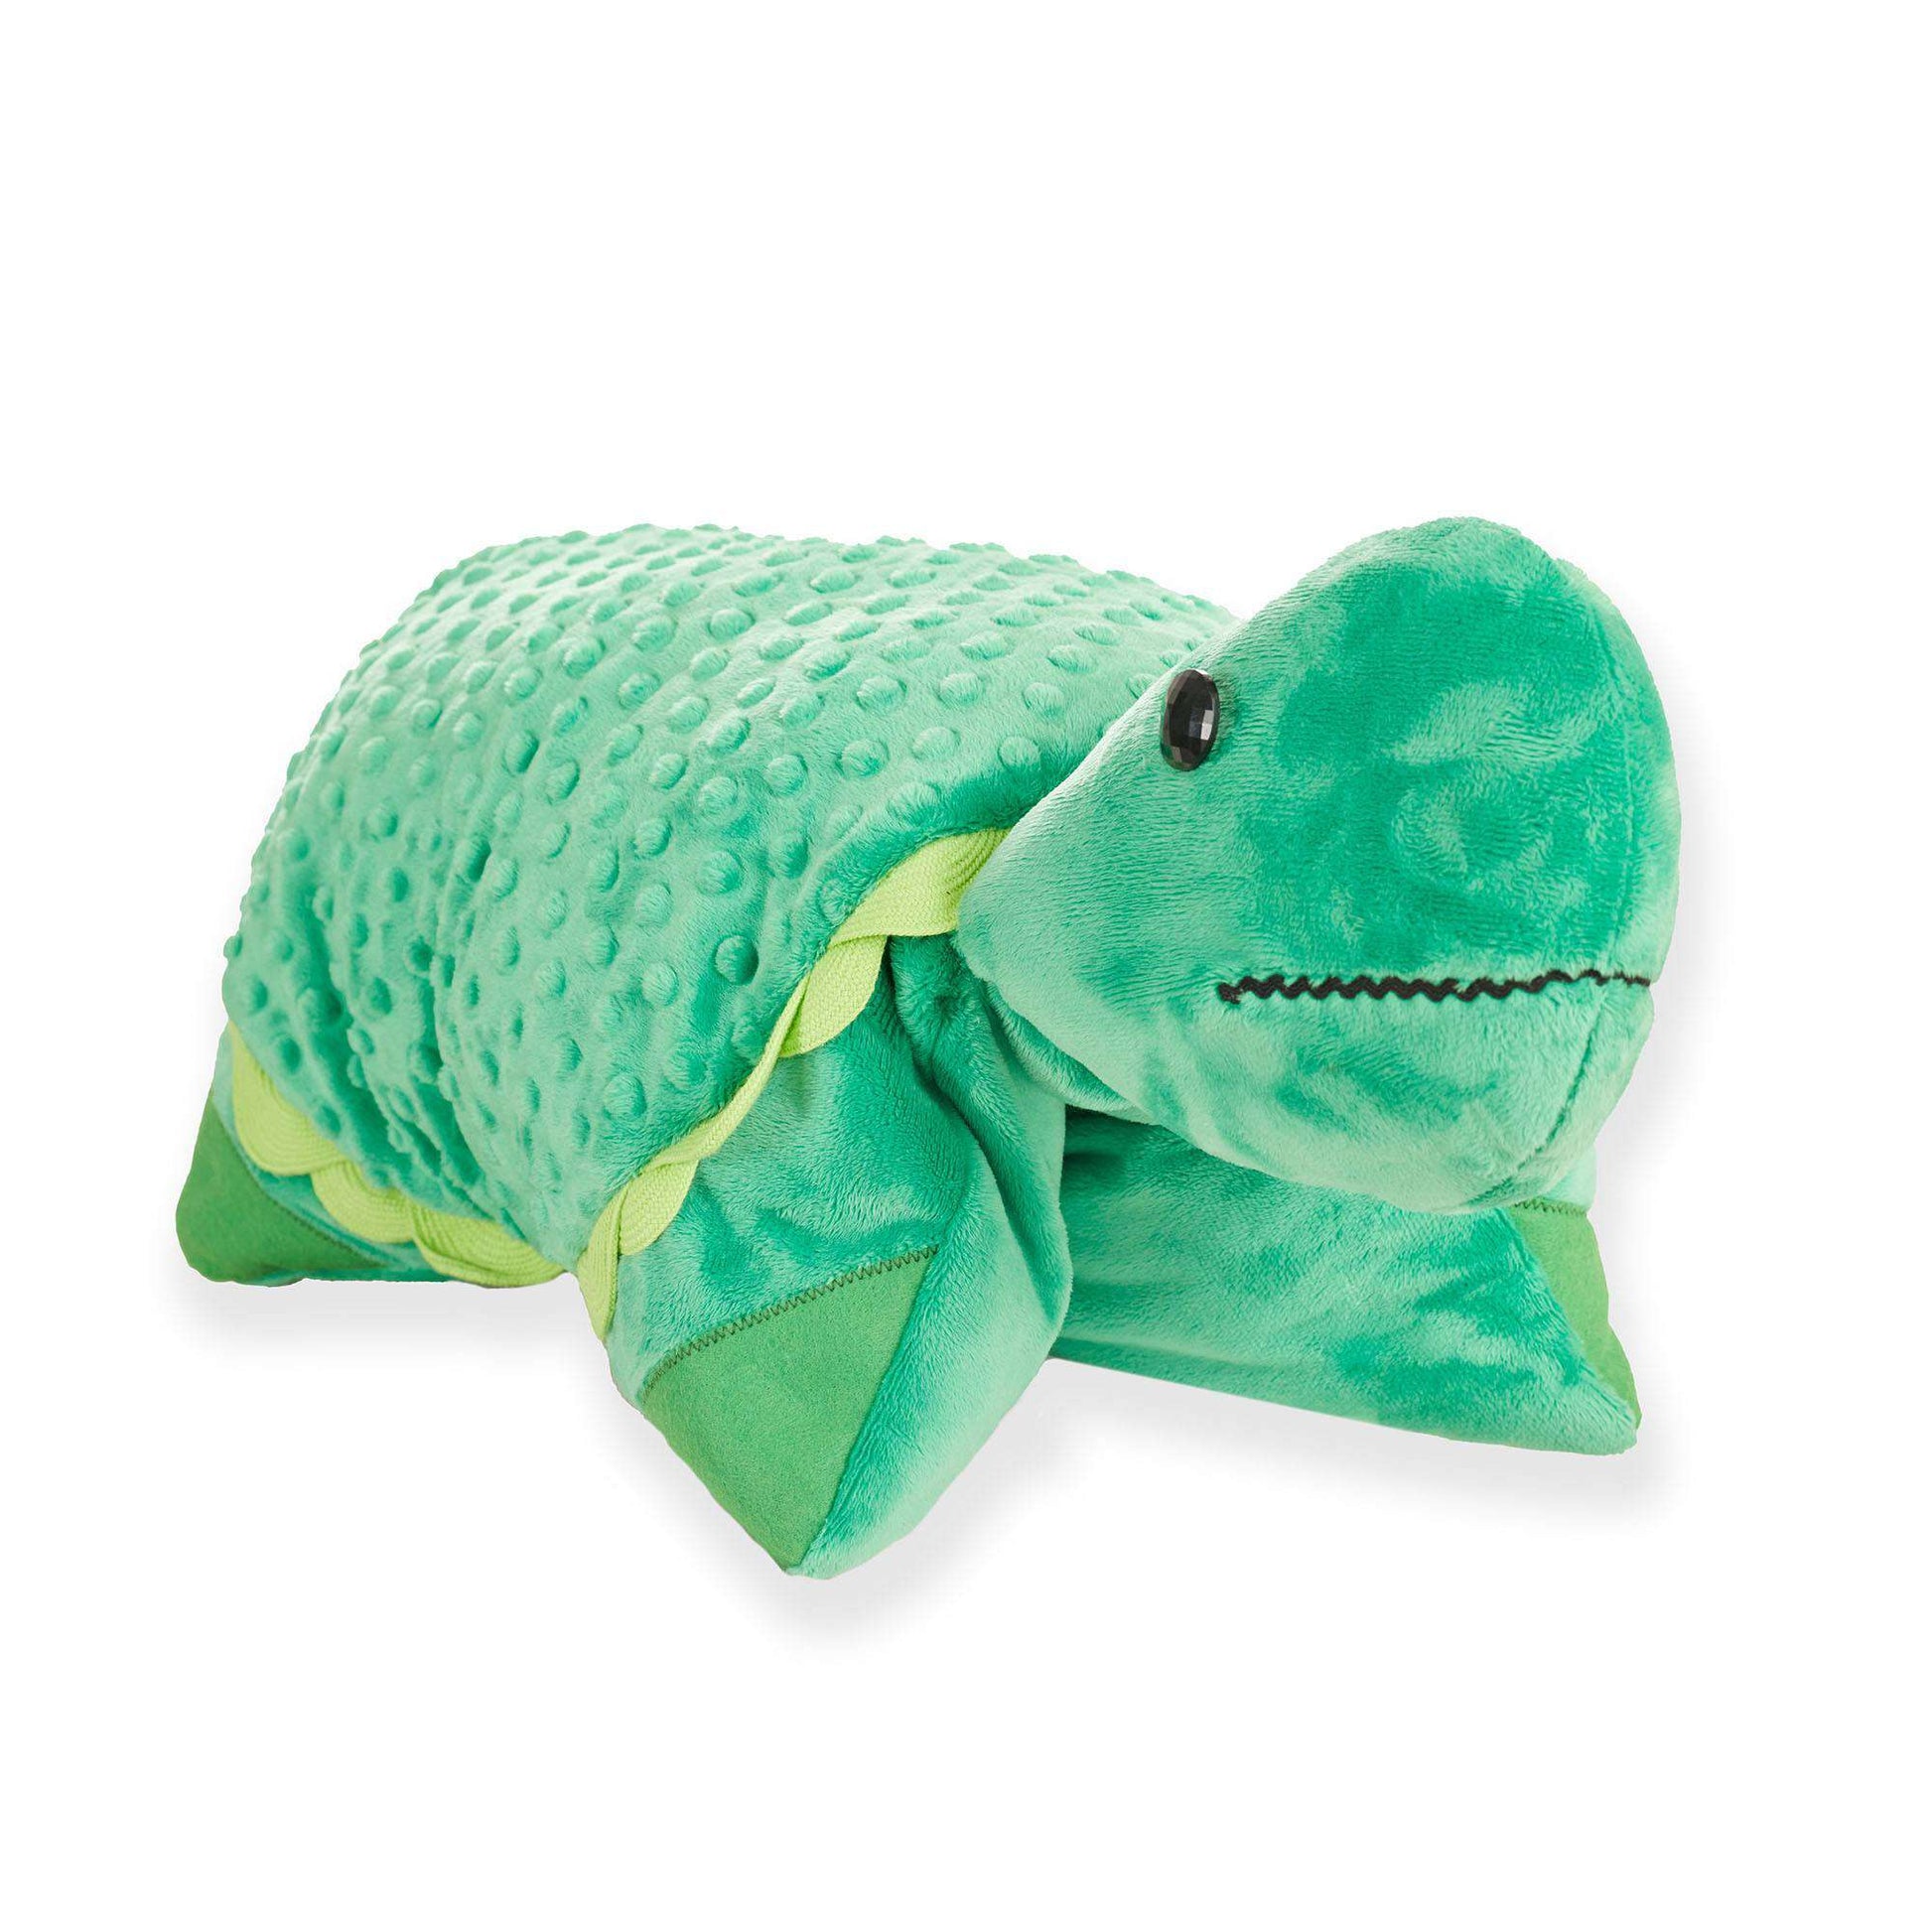 Free Coats & Clark Sewing Tommy Turtle Pillow Pattern